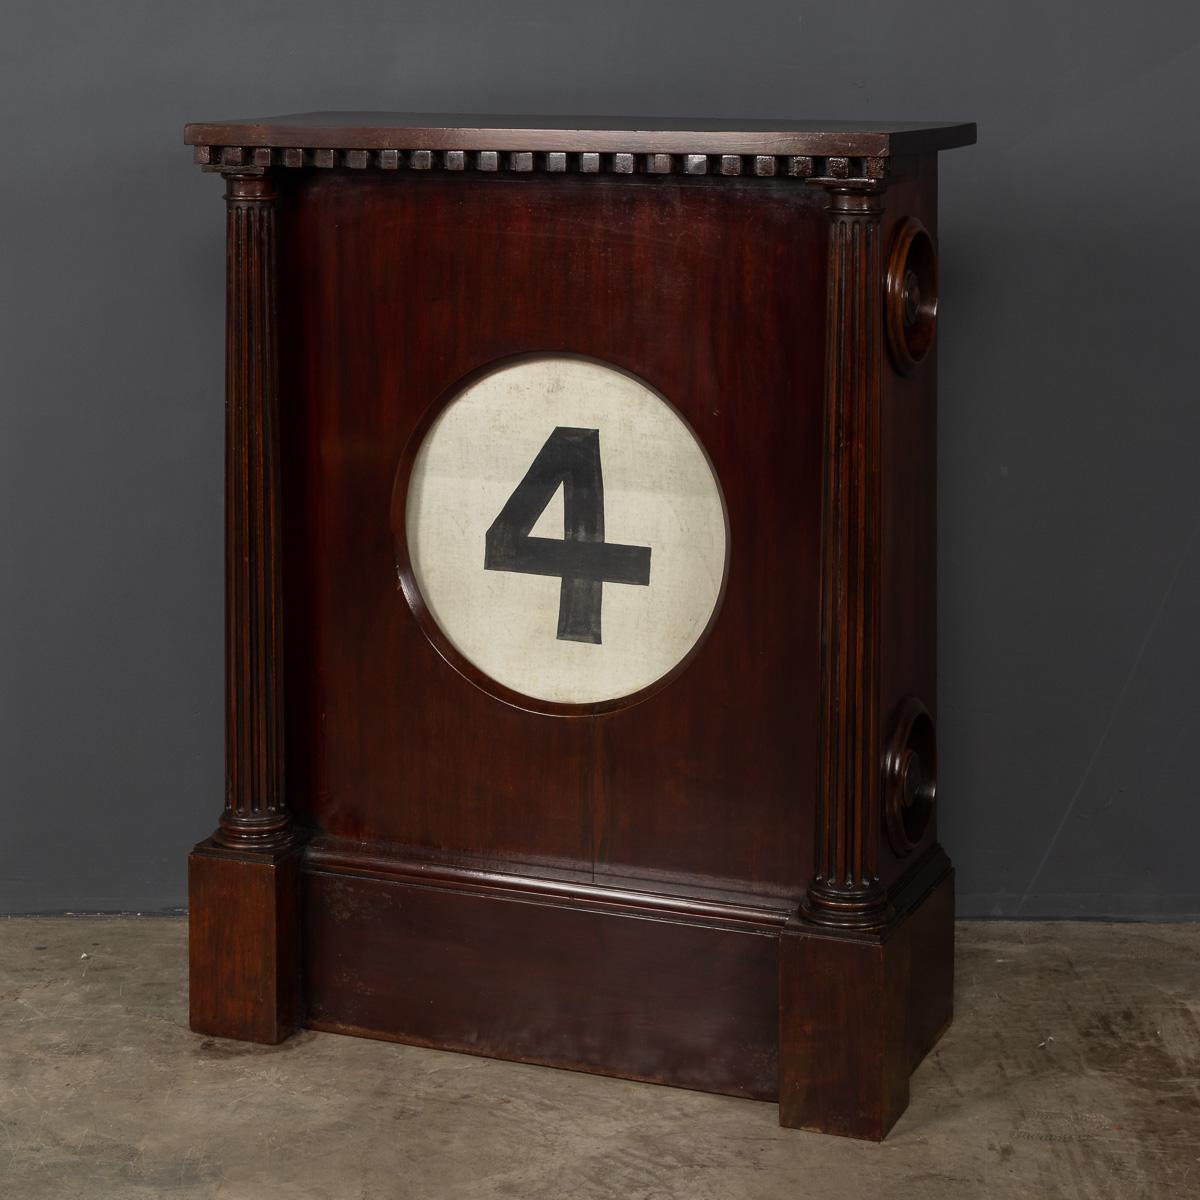 Antique early-20th Century British beautifully made rich mahogany oversized perpetual calendar made for a city bank, circa 1920's. A real conversation piece and a superb piece of history reminiscent of the bygone era.

CONDITION
In Great